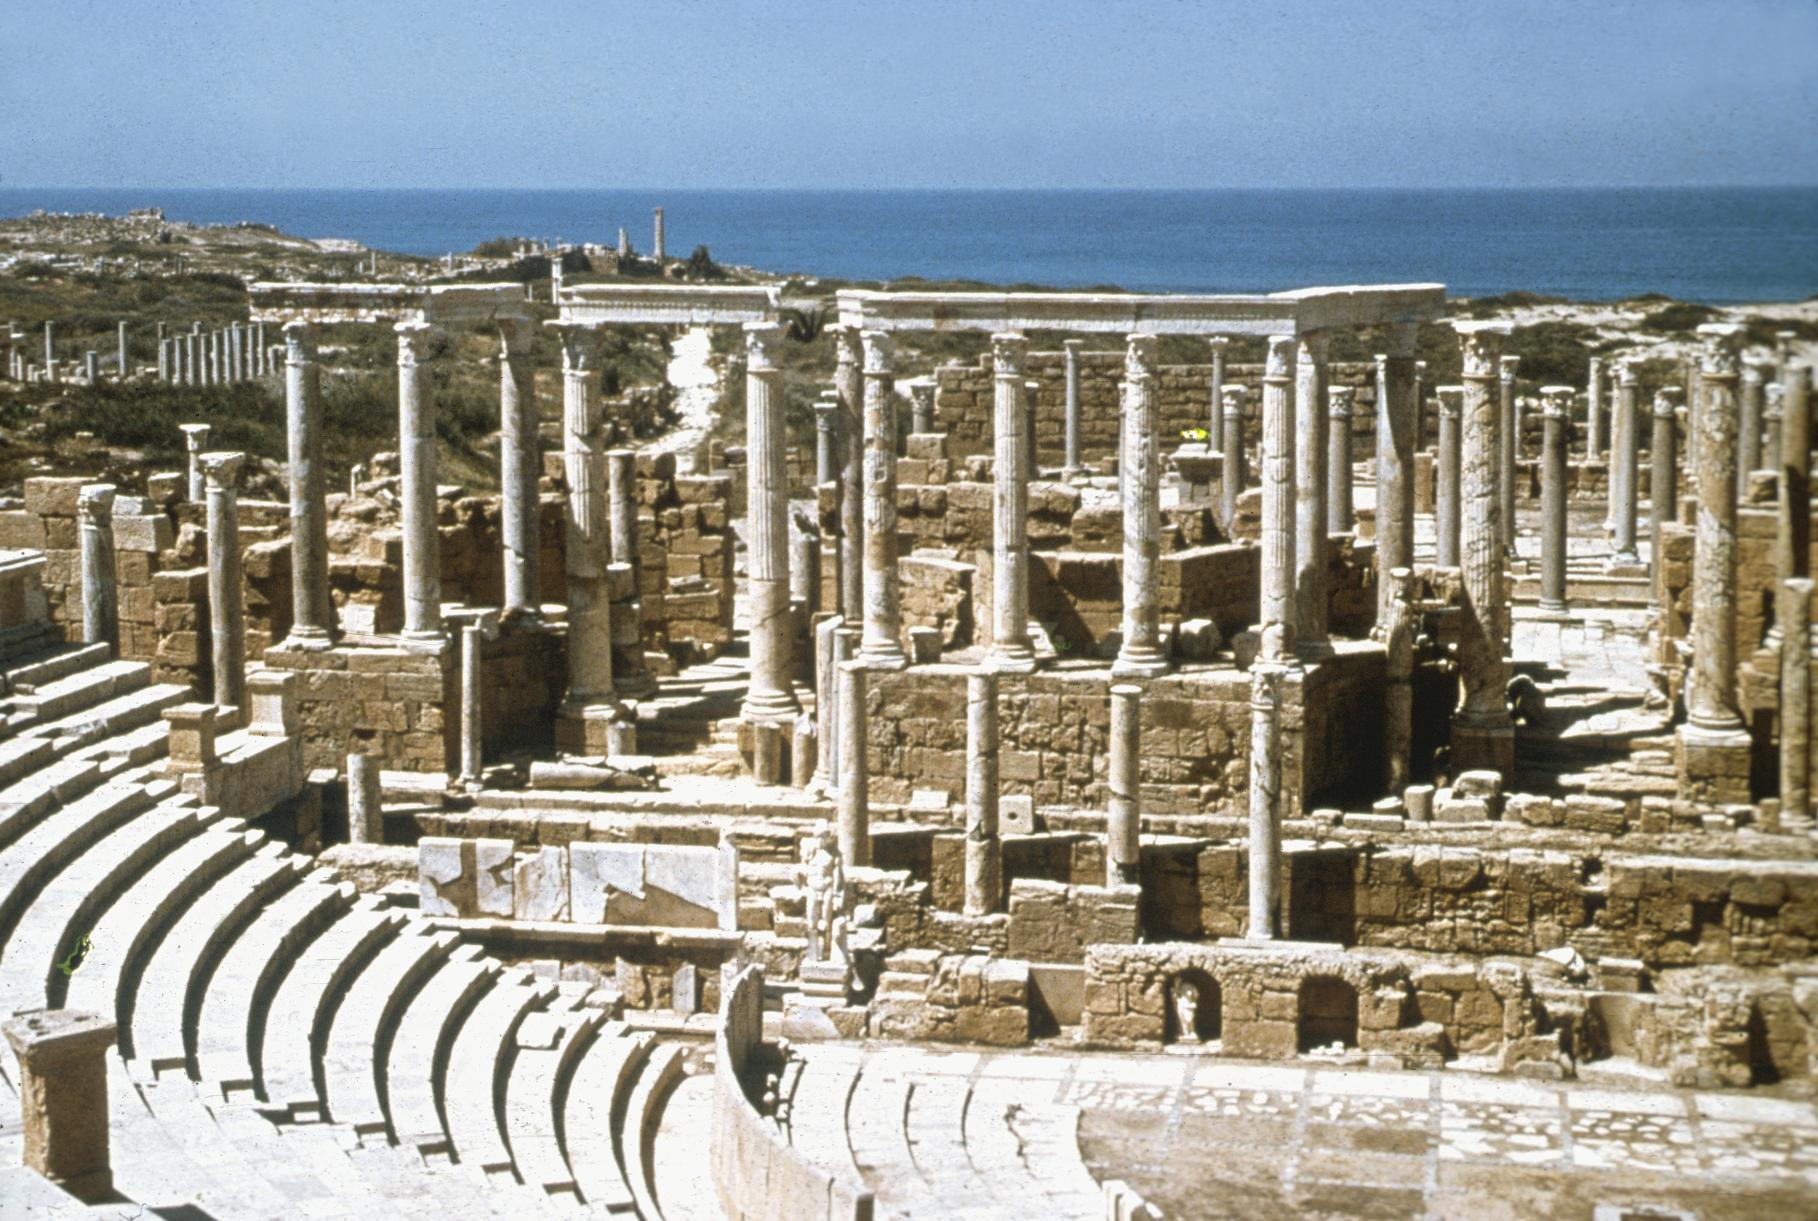 The Amphitheater at Leptis Magna